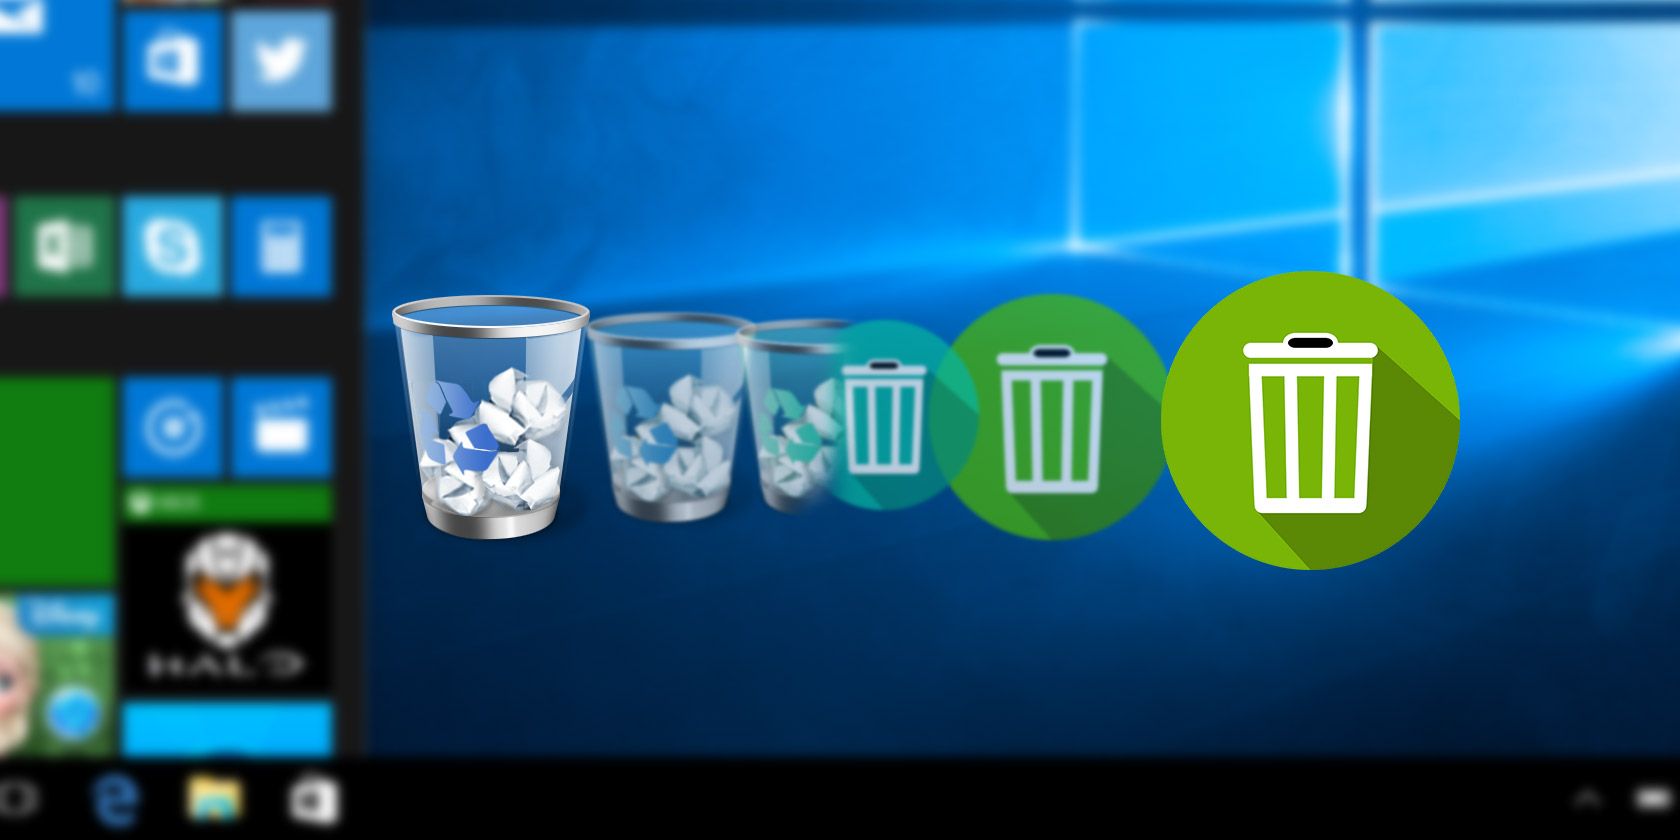 Windows Recycle Bin icon changing to a flat icon